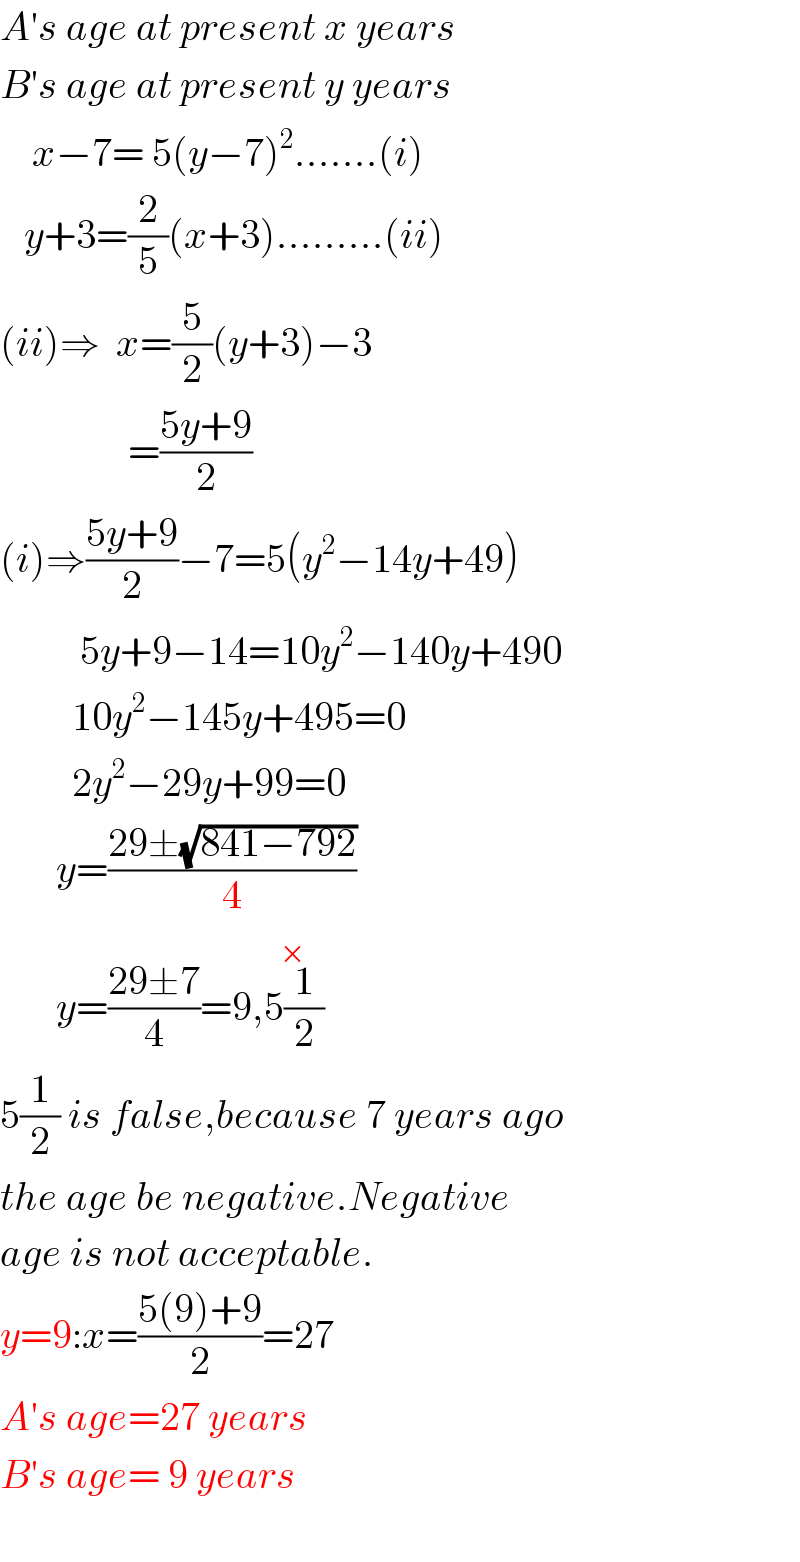 A′s age at present x years  B′s age at present y years      x−7= 5(y−7)^2 .......(i)     y+3=(2/5)(x+3).........(ii)  (ii)⇒  x=(5/2)(y+3)−3                  =((5y+9)/2)  (i)⇒((5y+9)/2)−7=5(y^2 −14y+49)            5y+9−14=10y^2 −140y+490           10y^2 −145y+495=0           2y^2 −29y+99=0         y=((29±(√(841−792)))/4)         y=((29±7)/4)=9,5(1/2)^(×)   5(1/2) is false,because 7 years ago  the age be negative.Negative  age is not acceptable.  y=9:x=((5(9)+9)/2)=27  A′s age=27 years  B′s age= 9 years    